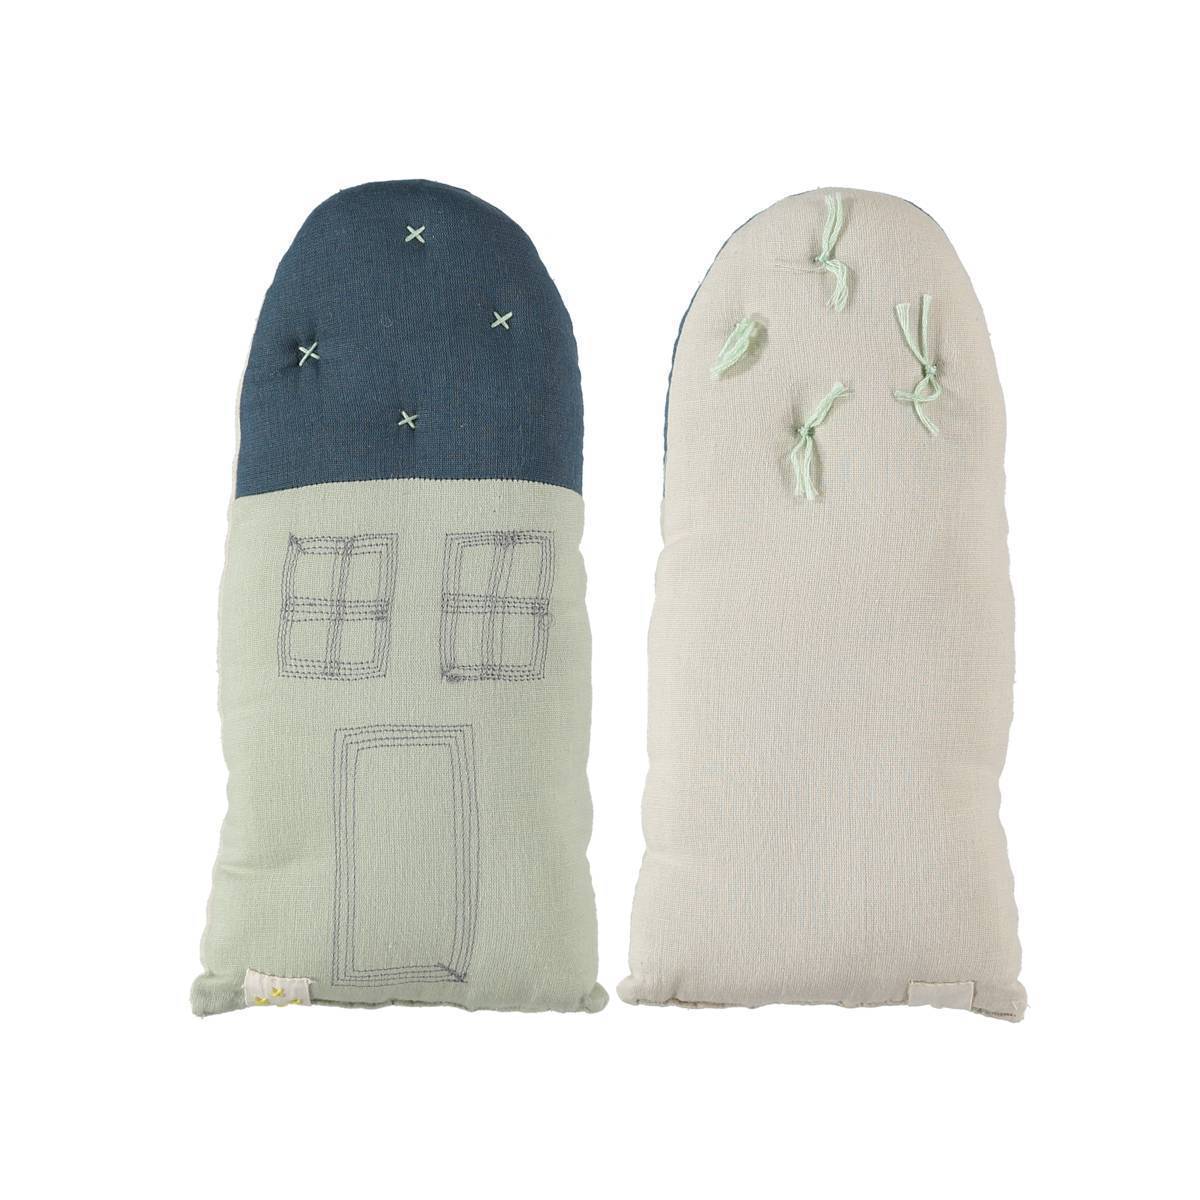 Camomile London | petite house kids cushion | mint and midnight blue - front back